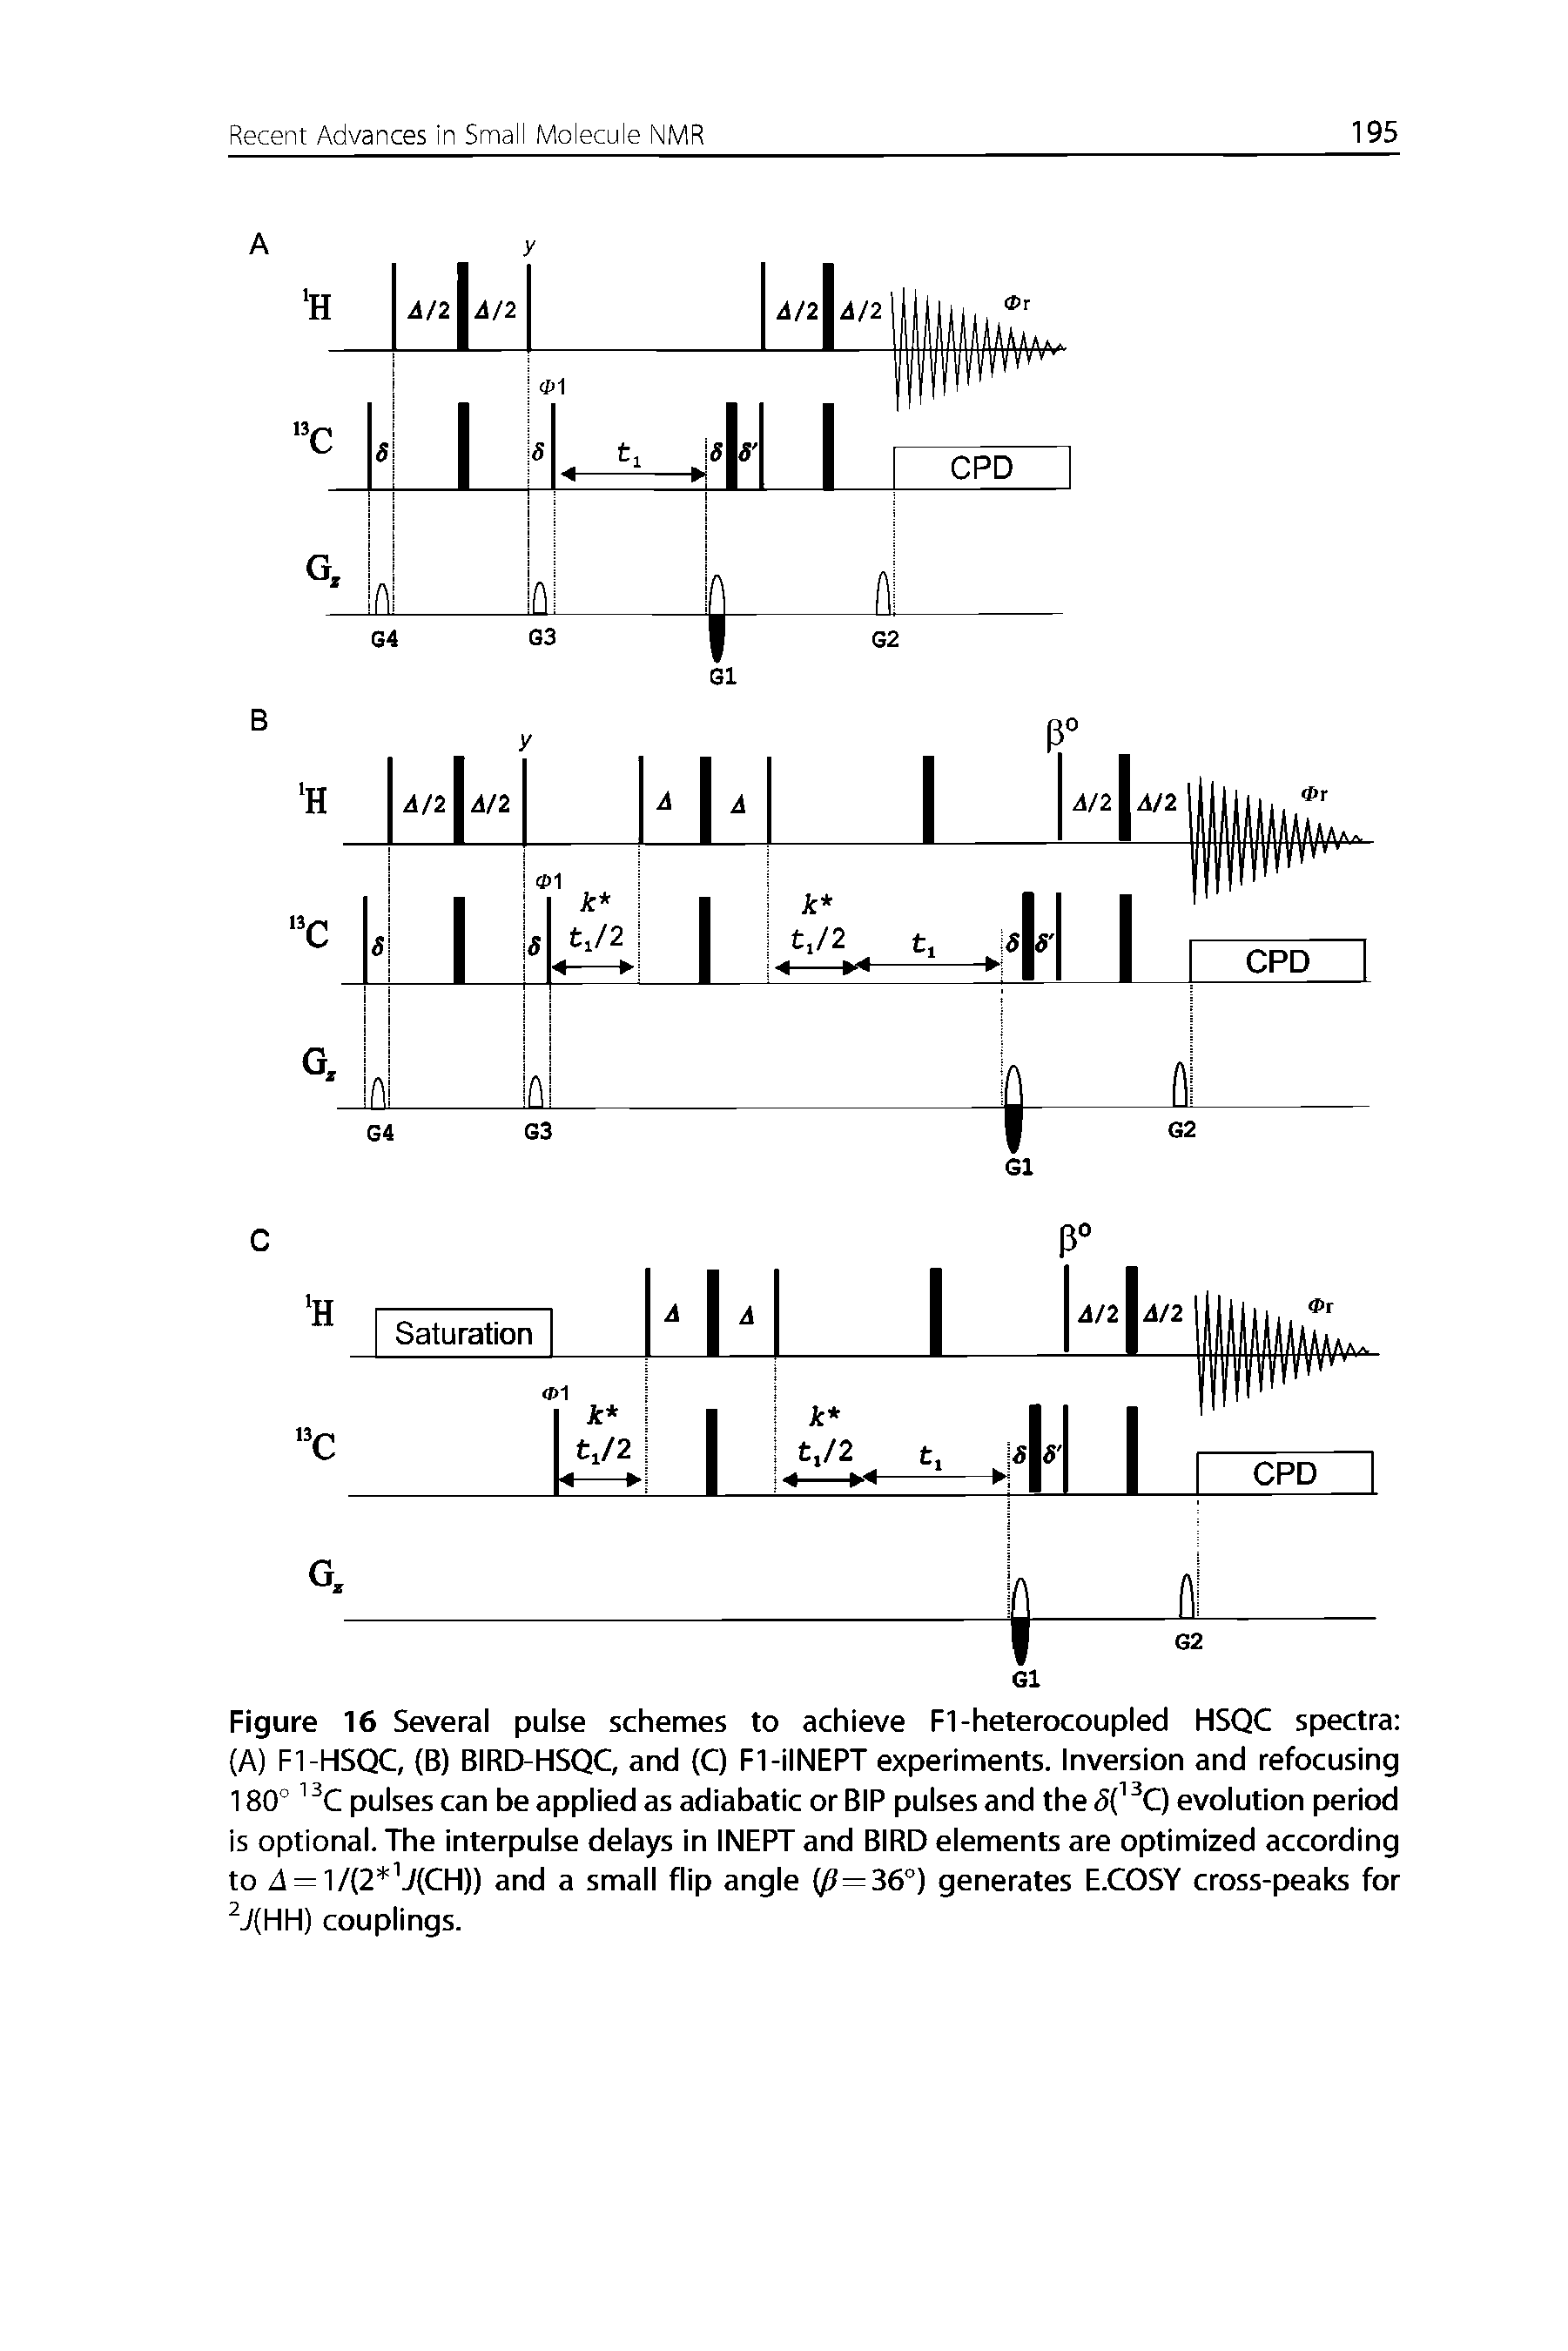 Figure 16 Several pulse schemes to achieve Fl-heterocoupled HSQC spectra (A) Fl-HSQC, (B) BIRD-HSQC and (C) FI-ilNEPT experiments. Inversion and refocusing 180° pulses can be applied as adiabatic or BIP pulses and the evolution period is optional. The interpulse delays in INEPT and BIRD elements are optimized according to 4 = 1/(2 J(CH)) and a small flip angle fi=36°) generates E.COSY cross-peaks for J(HH) couplings.